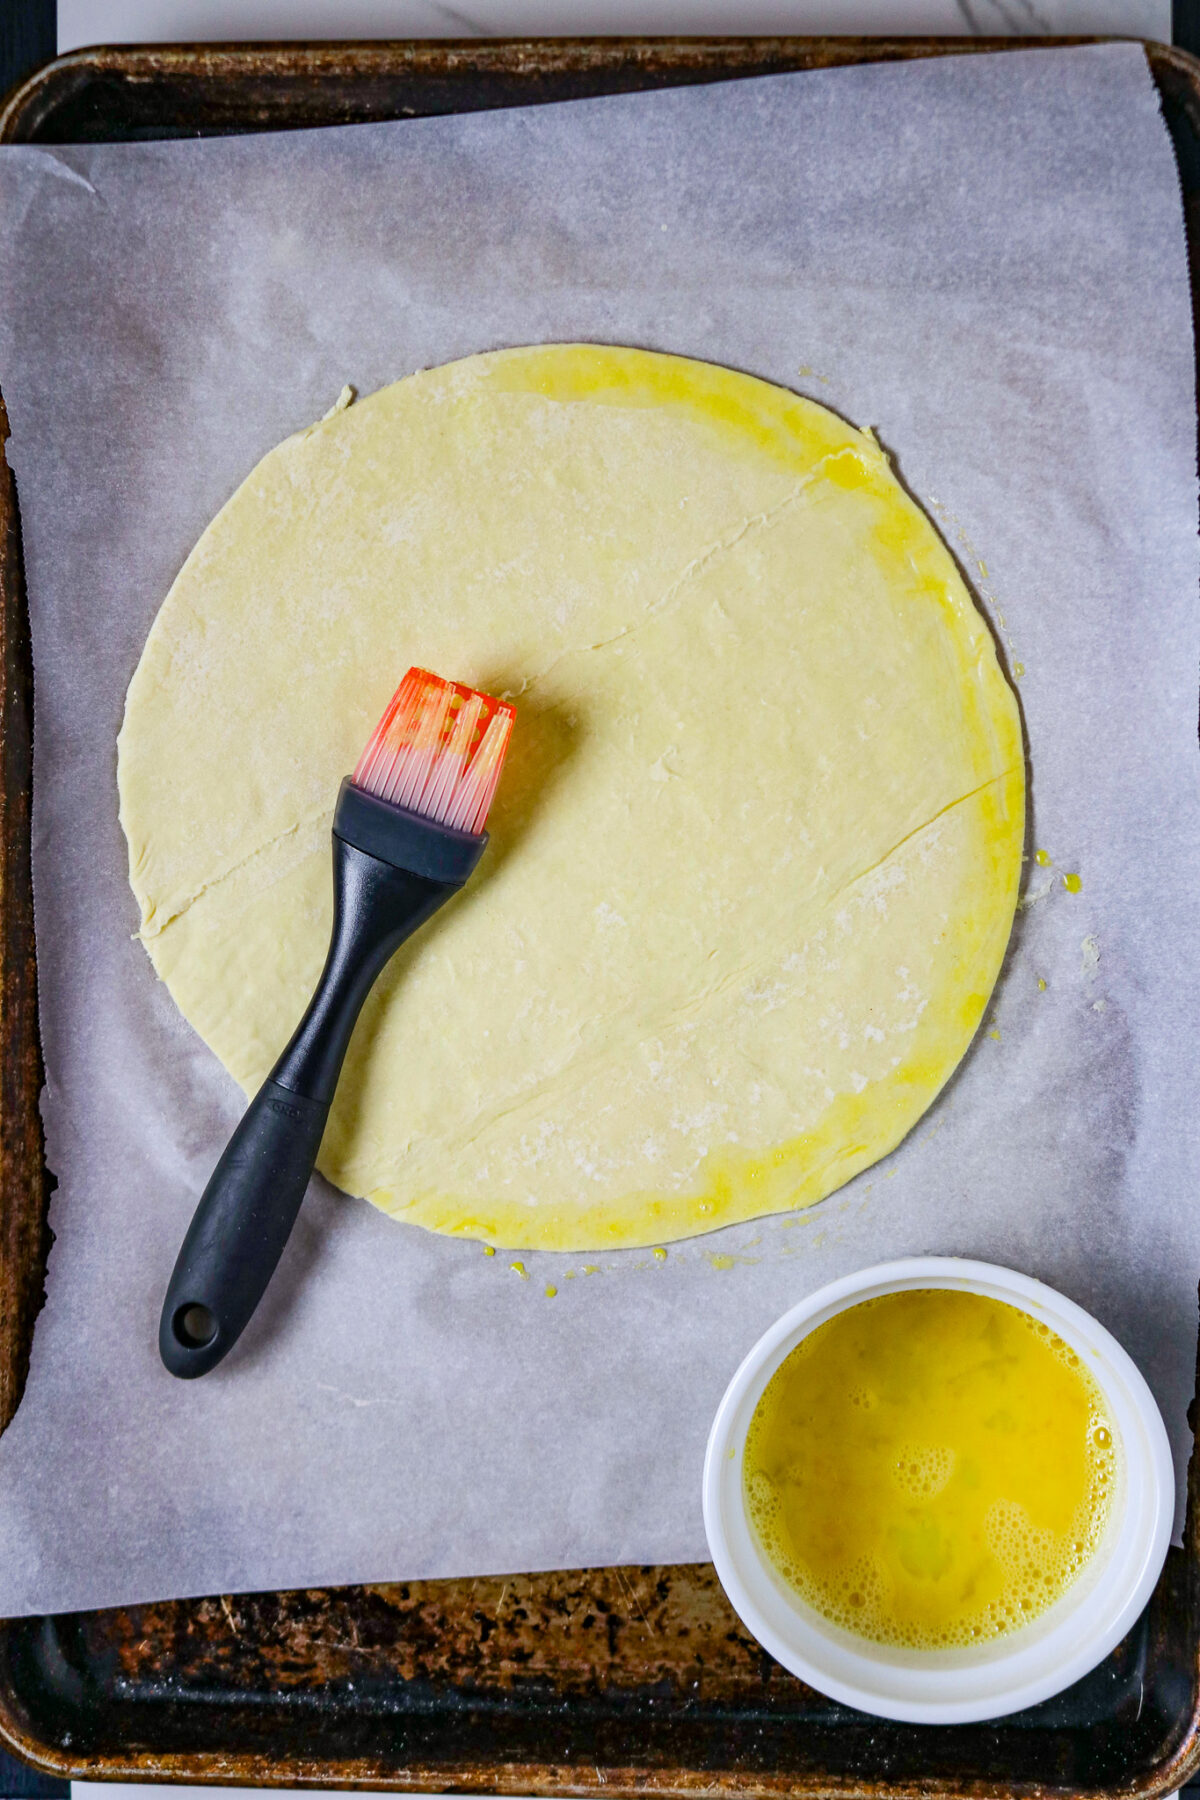 A round puff pastry dough on a parchment paper with a pastry brush laying on top.